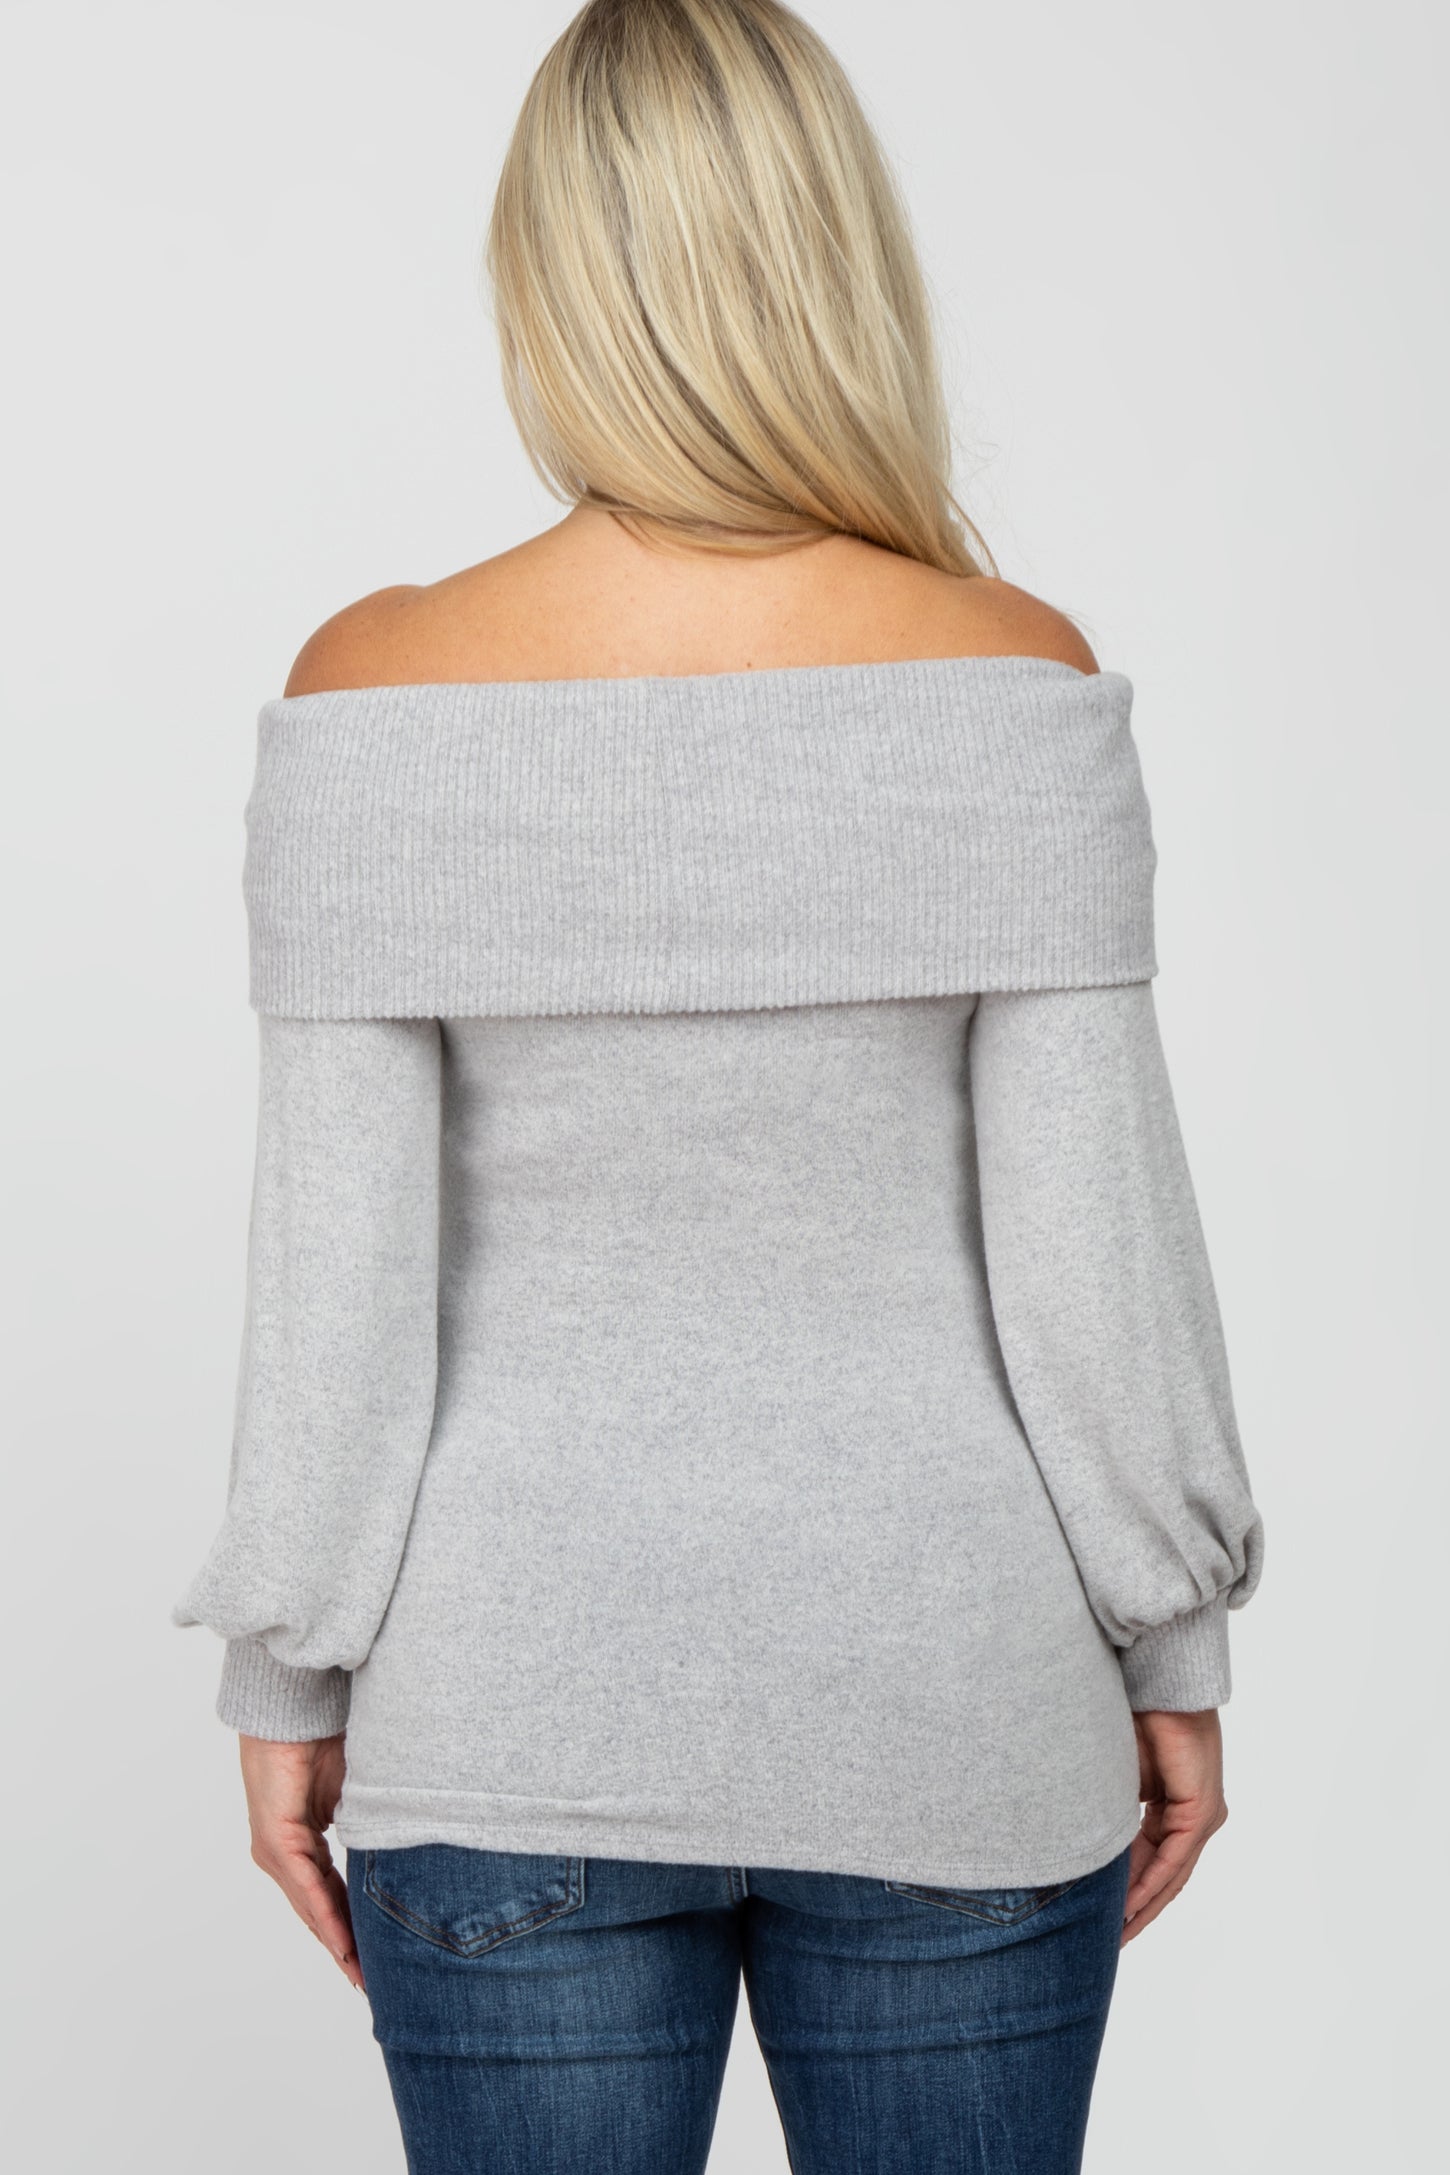 Heather Grey Soft Brushed Off Shoulder Fitted Maternity Top